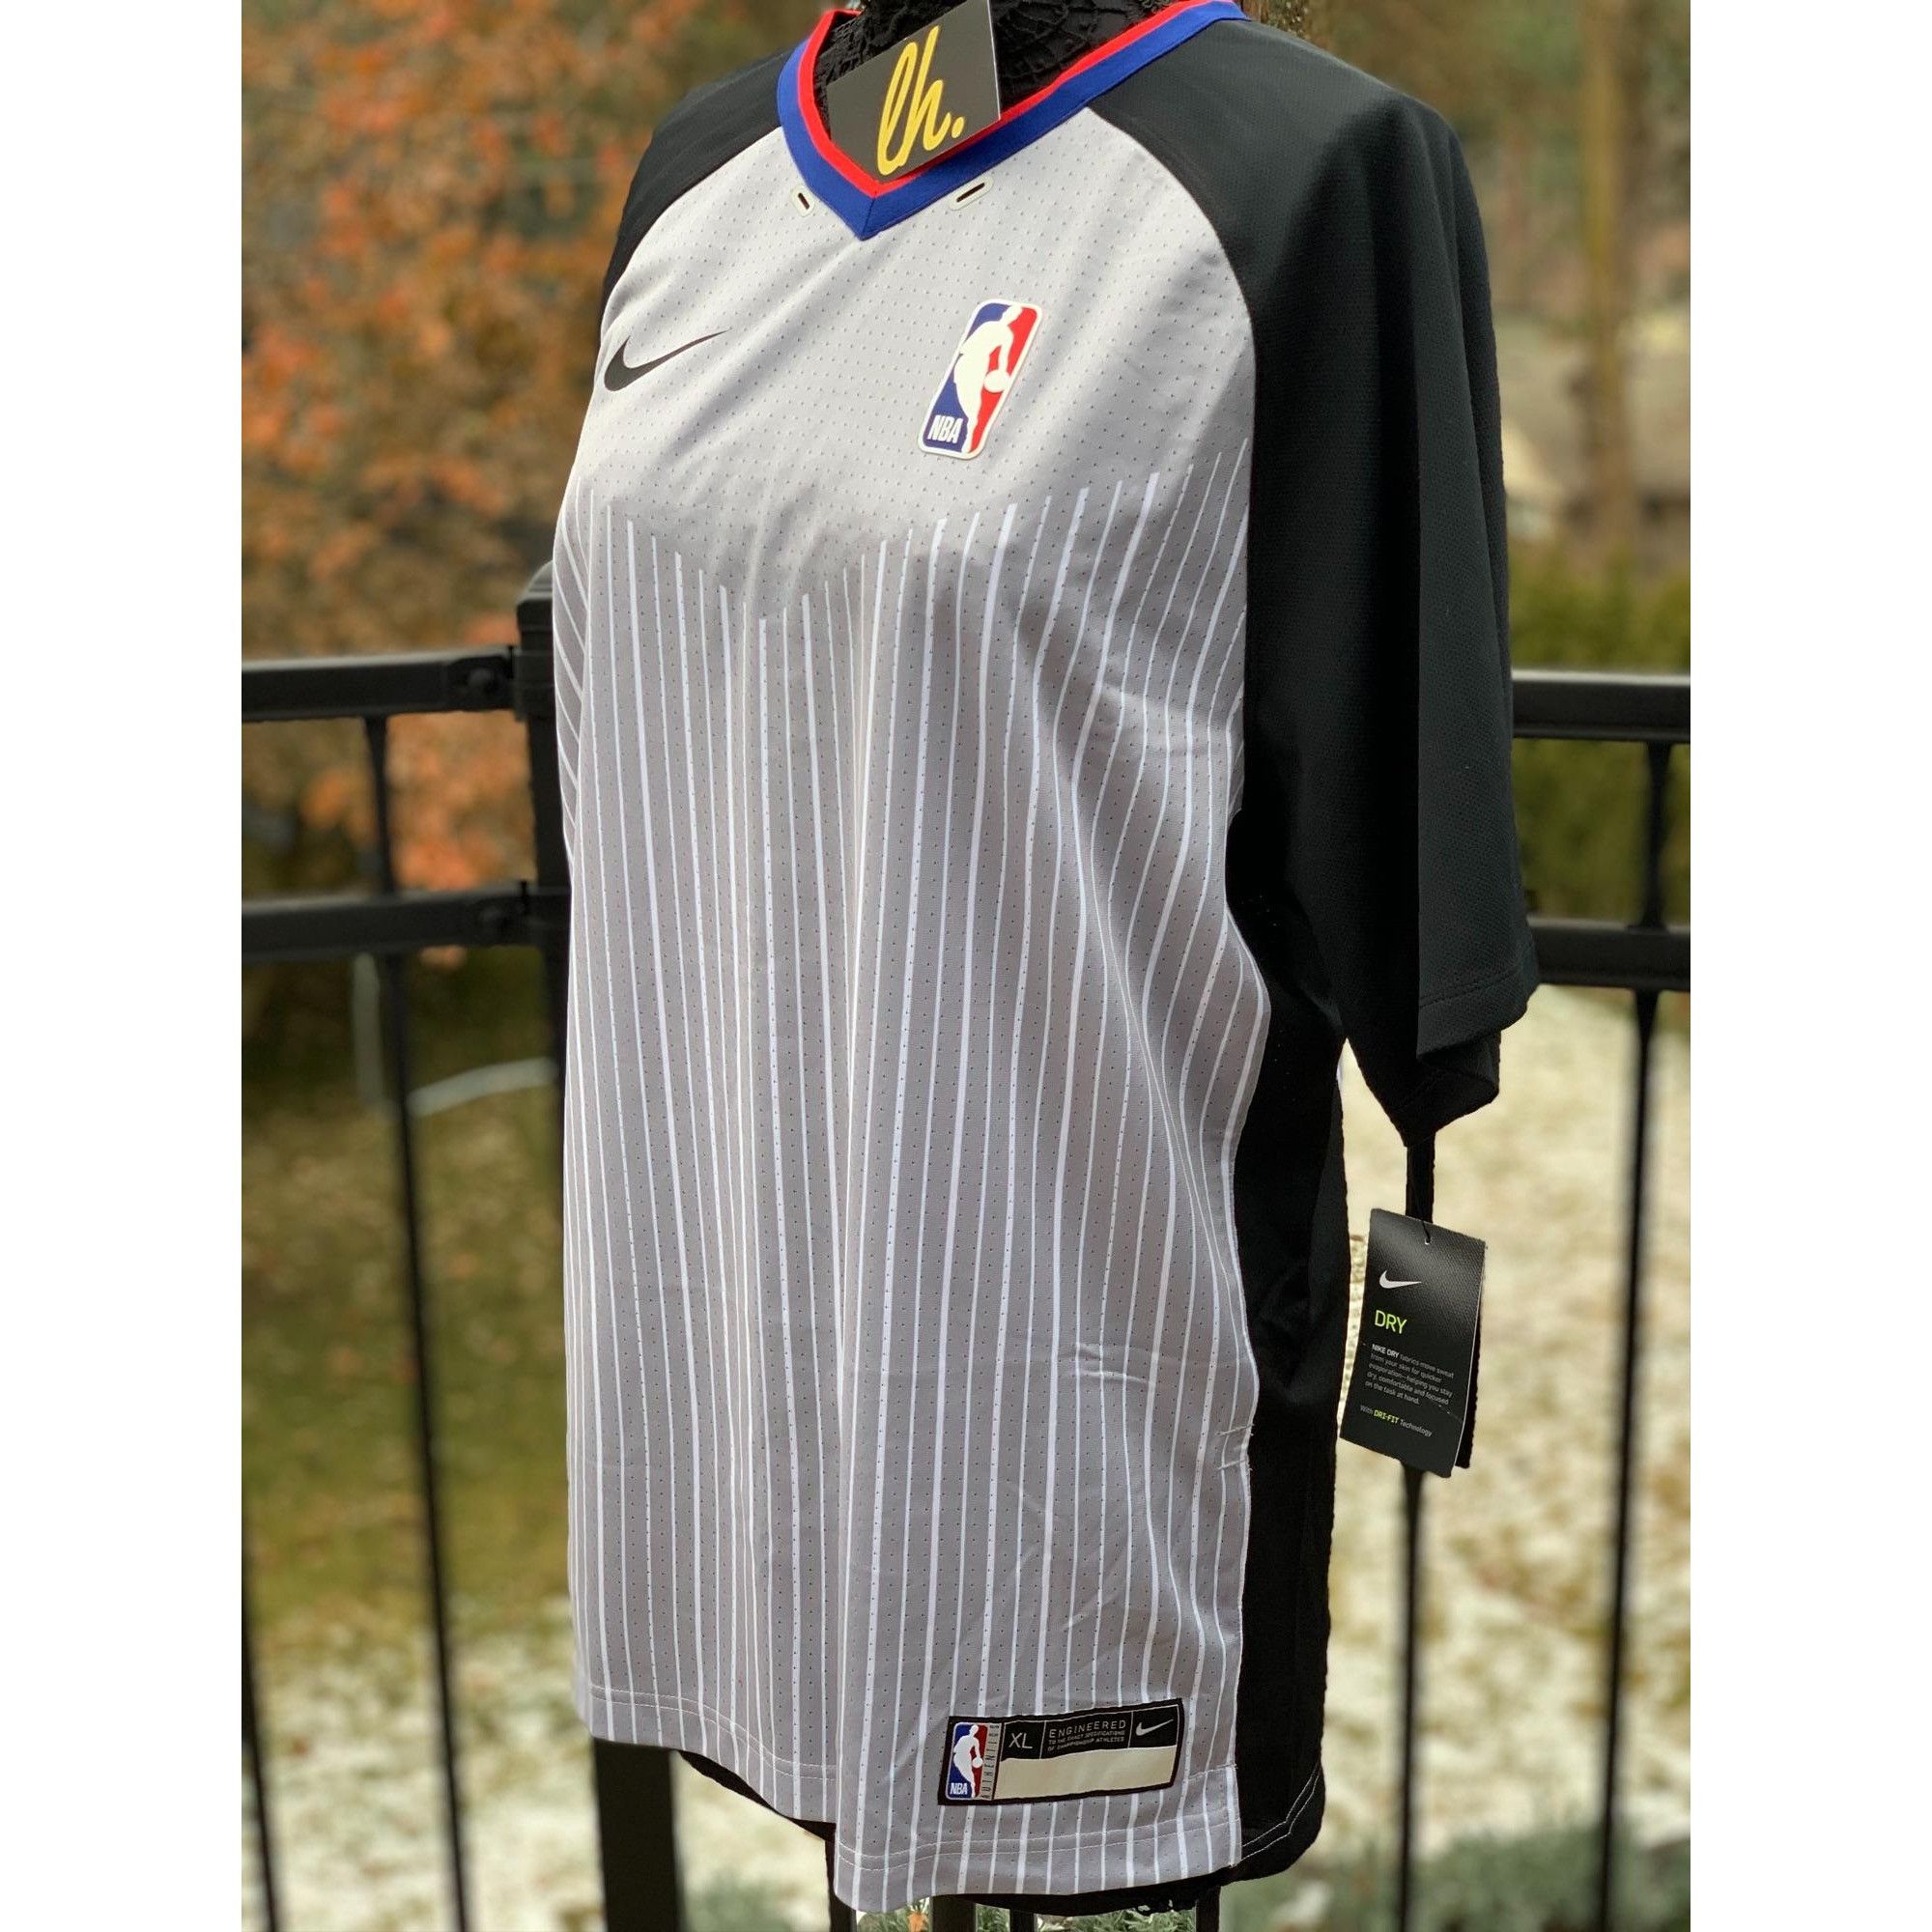 Nba Referee Jersey FOR SALE! - PicClick